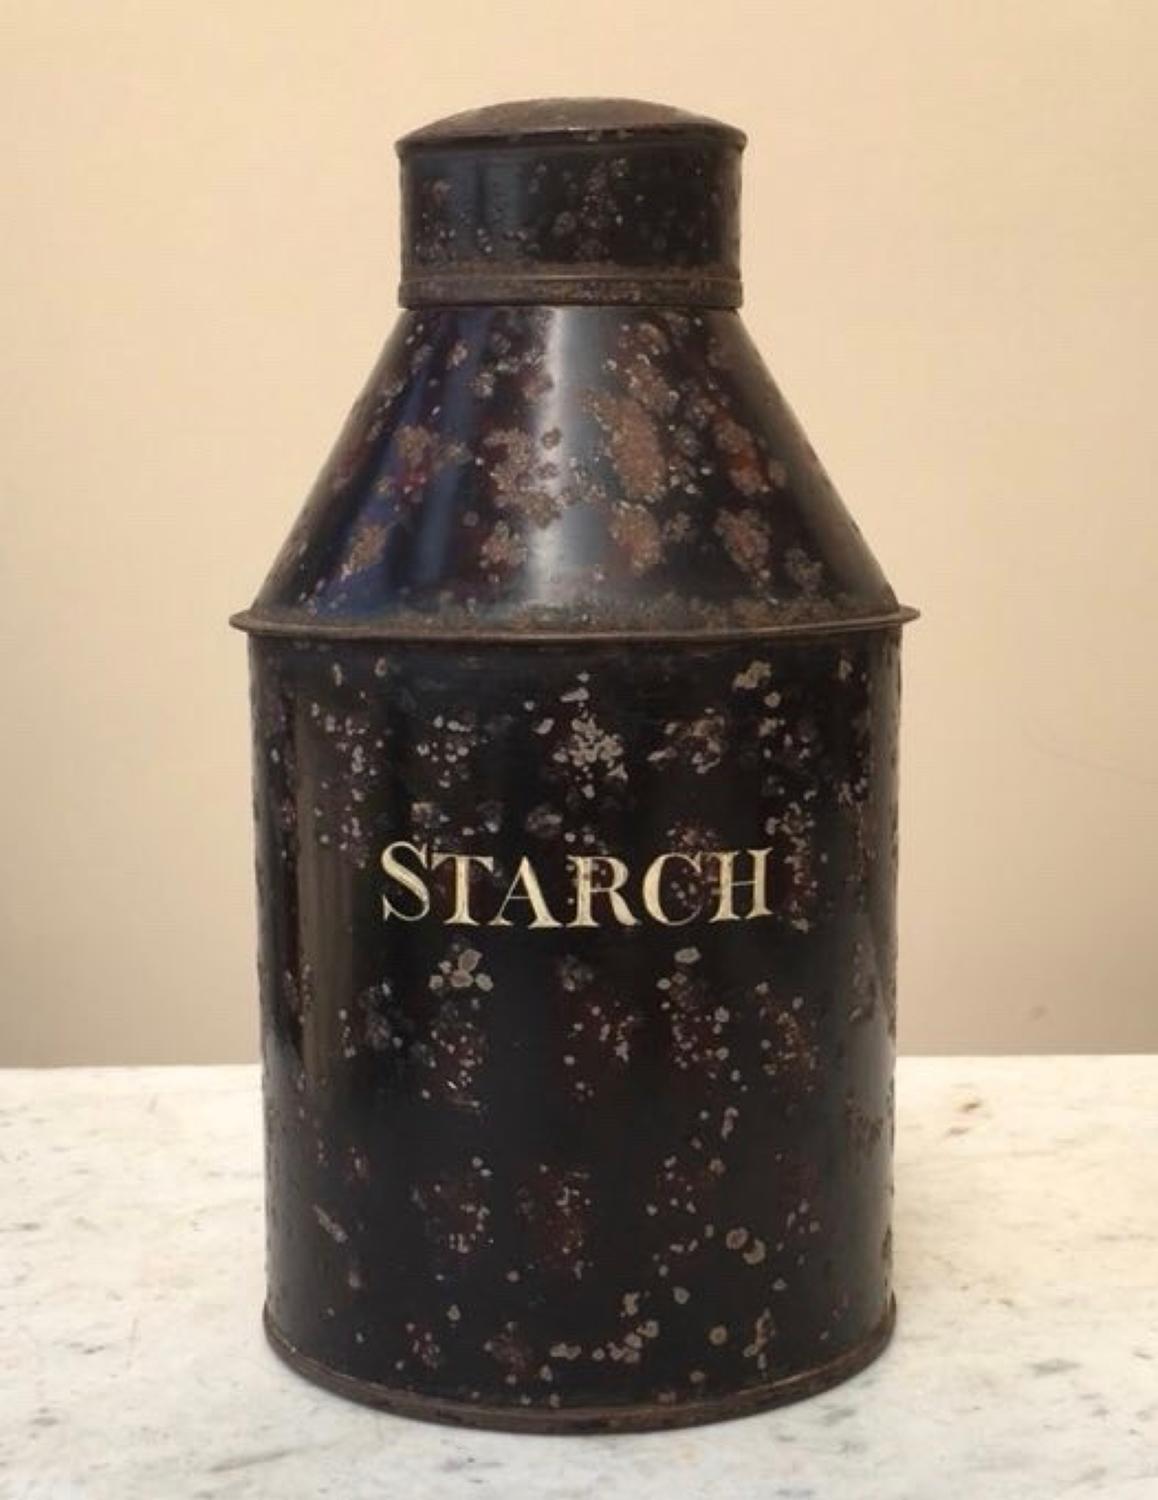 Early Victorian Toleware Jar - Starch